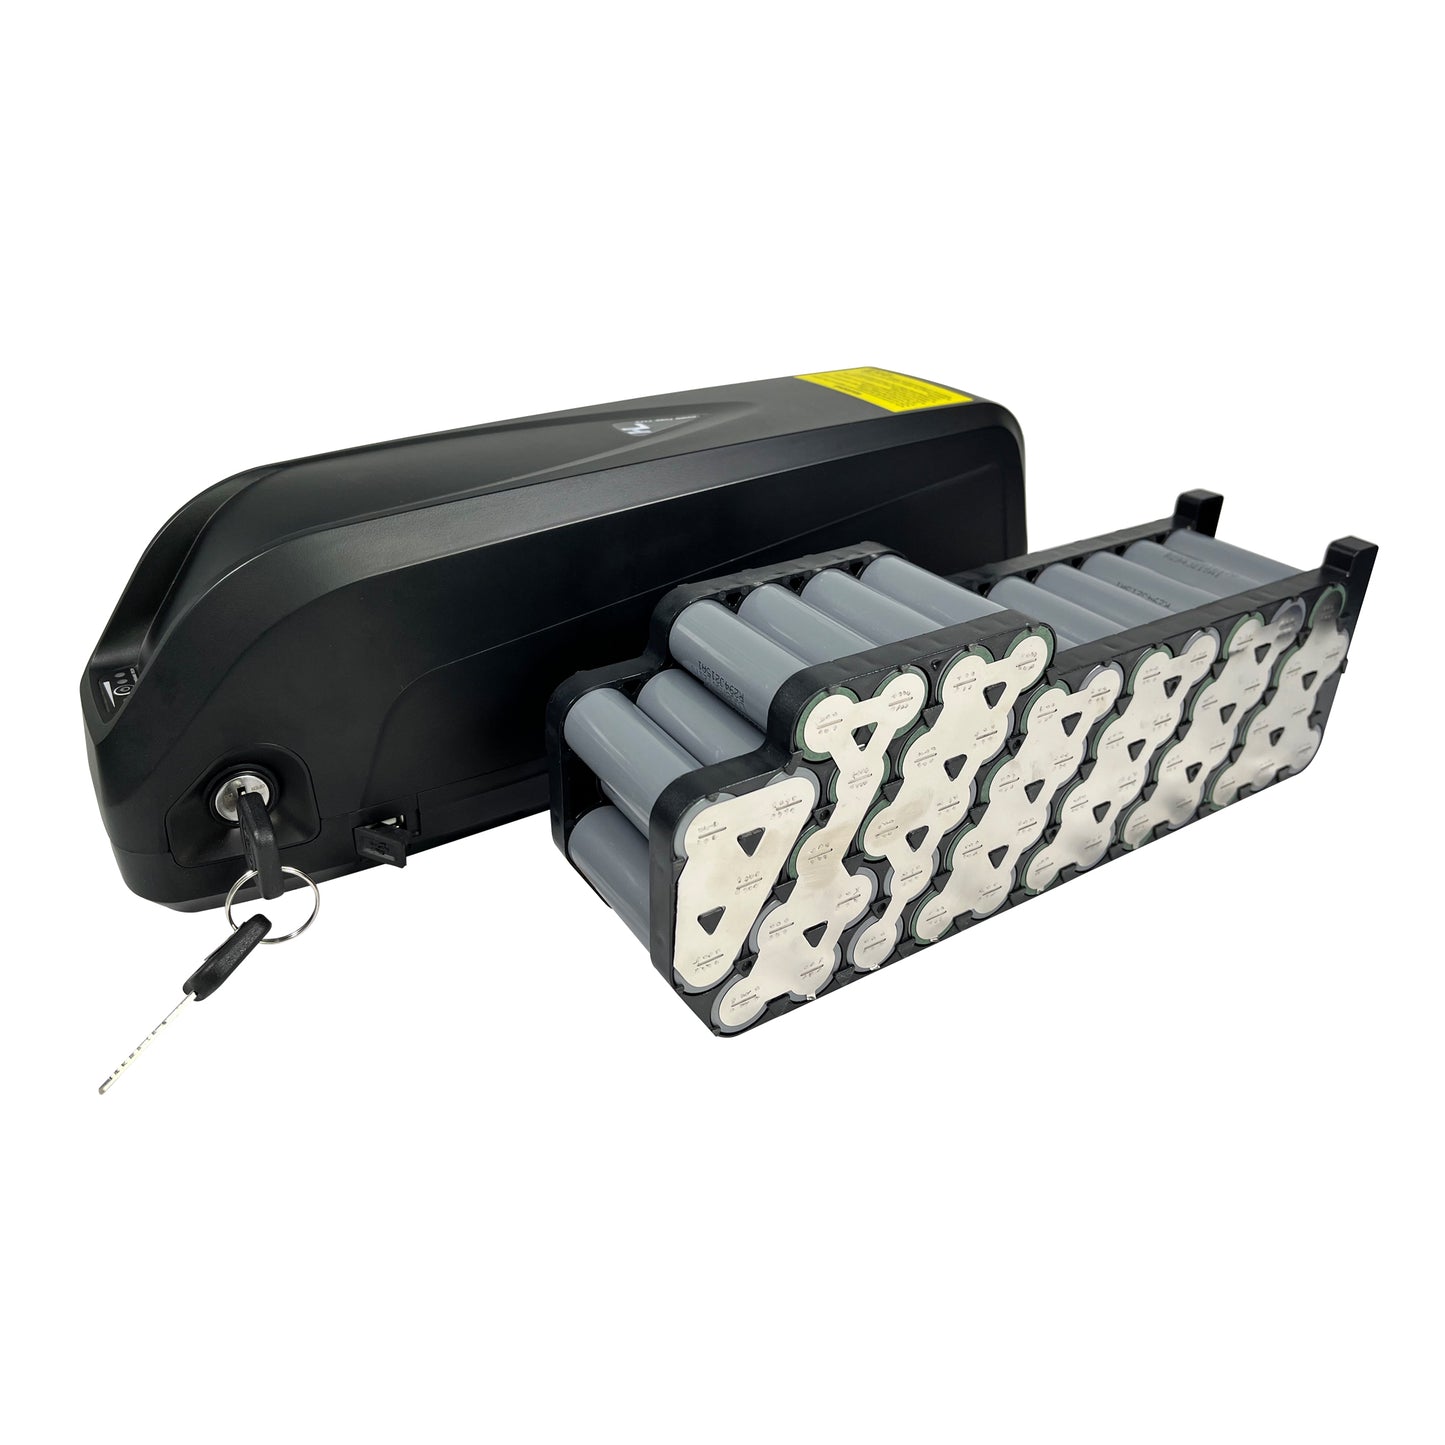 UK stock 52V20Ah  Hailong ebike battery LG21700 A grade cell 50A BMS support 2000W motor included 4A charger